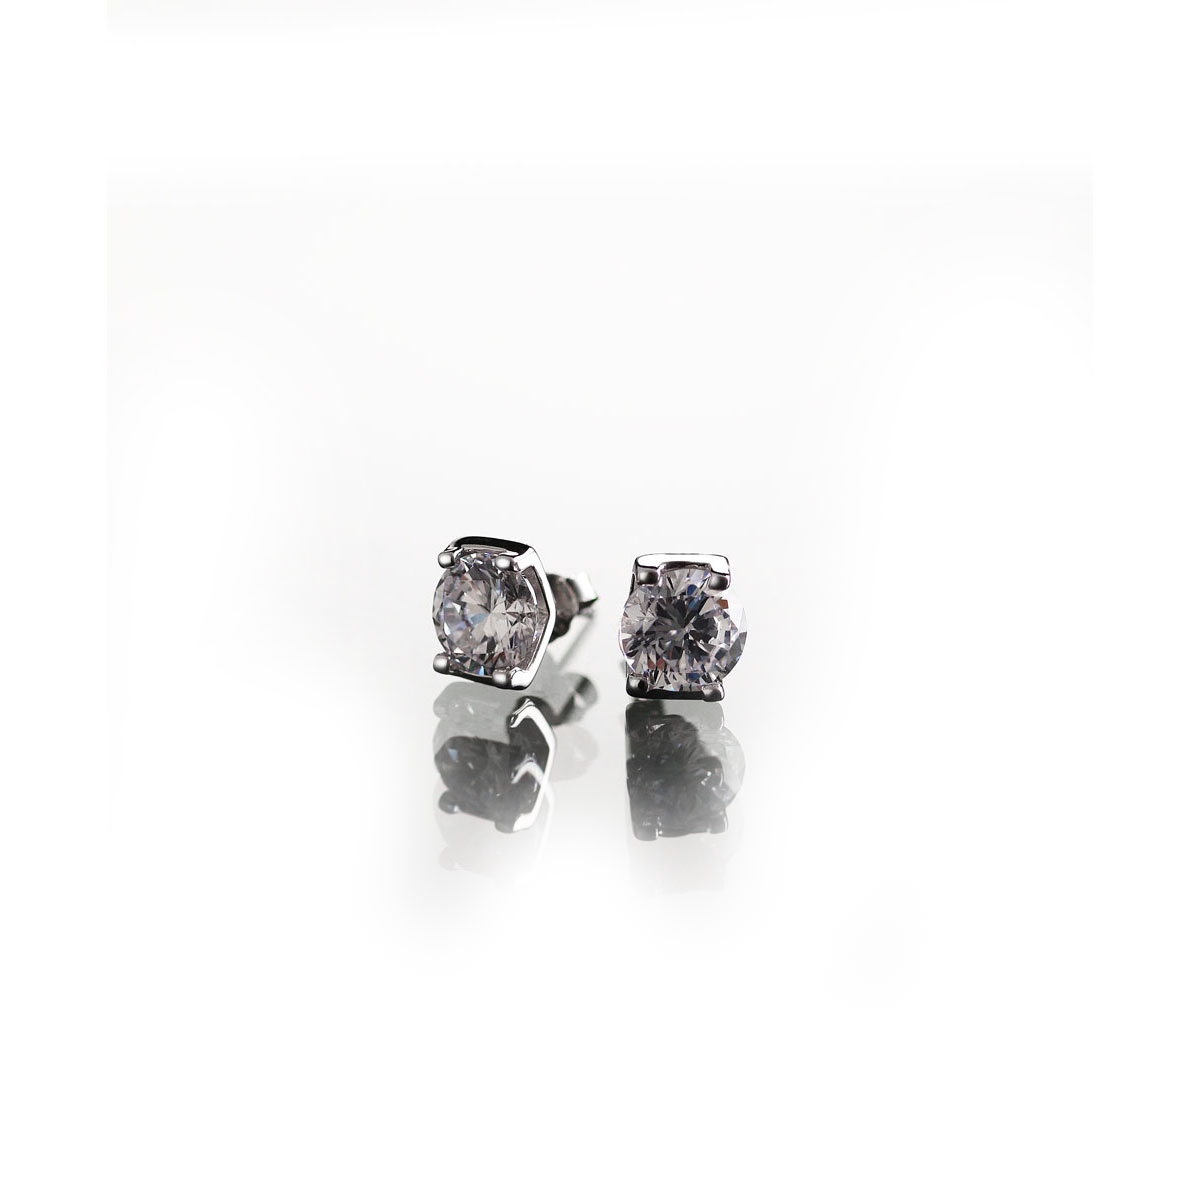 Cashs Ireland, Crystal Sterling Silver Modern Solitaire Pierced Earrings Pair